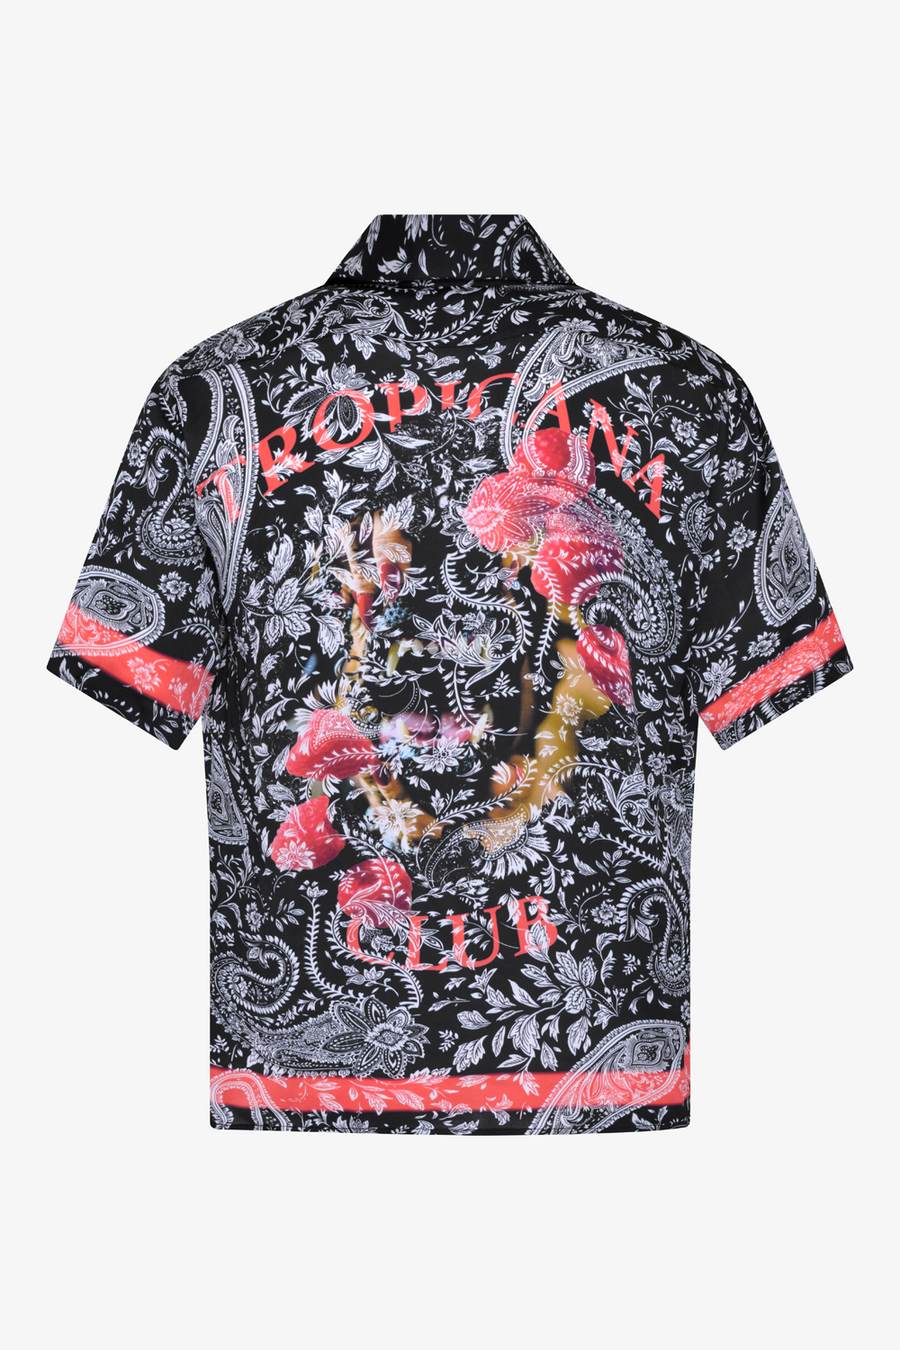 Buy the RH45 Tropicana Hawaiian Shirt in Black at Intro. Spend £50 for free UK delivery. Official stockists. We ship worldwide.